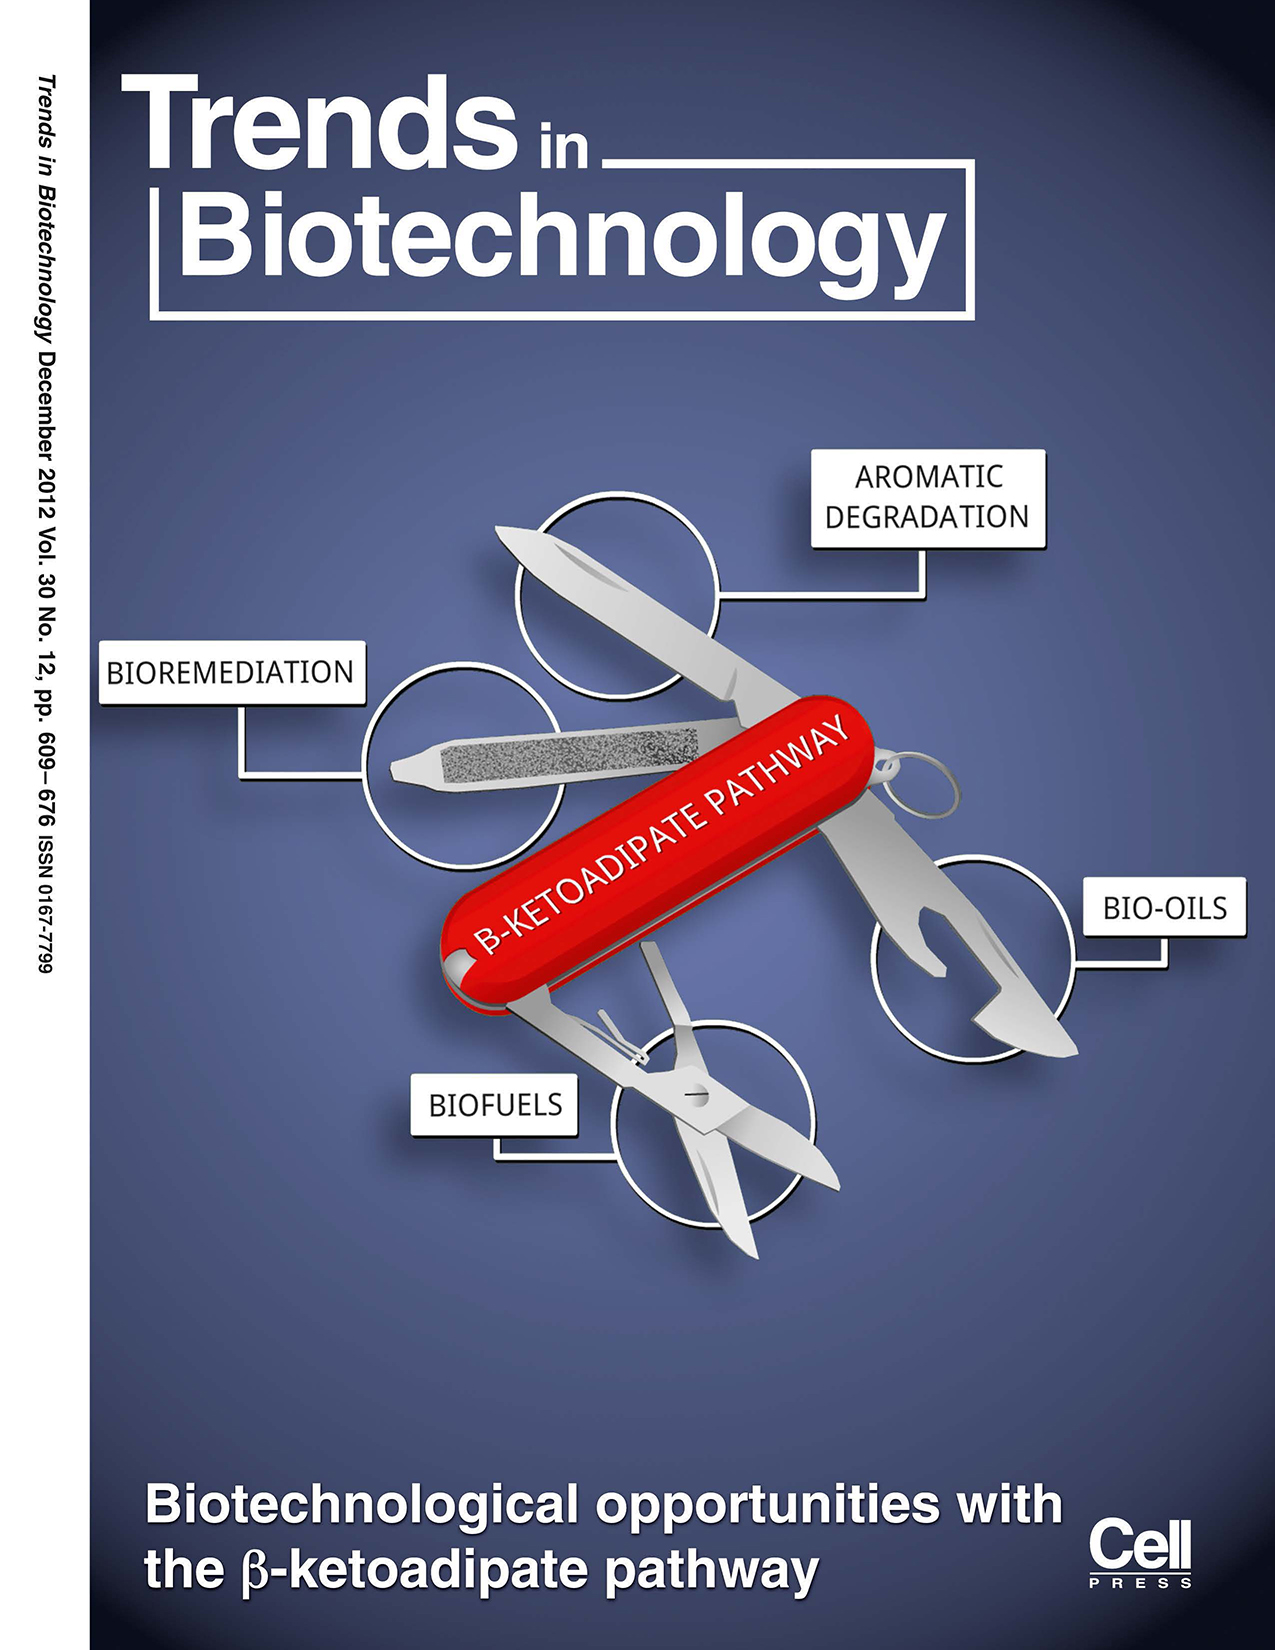 Trends in Biotechnology December 2012 cover.